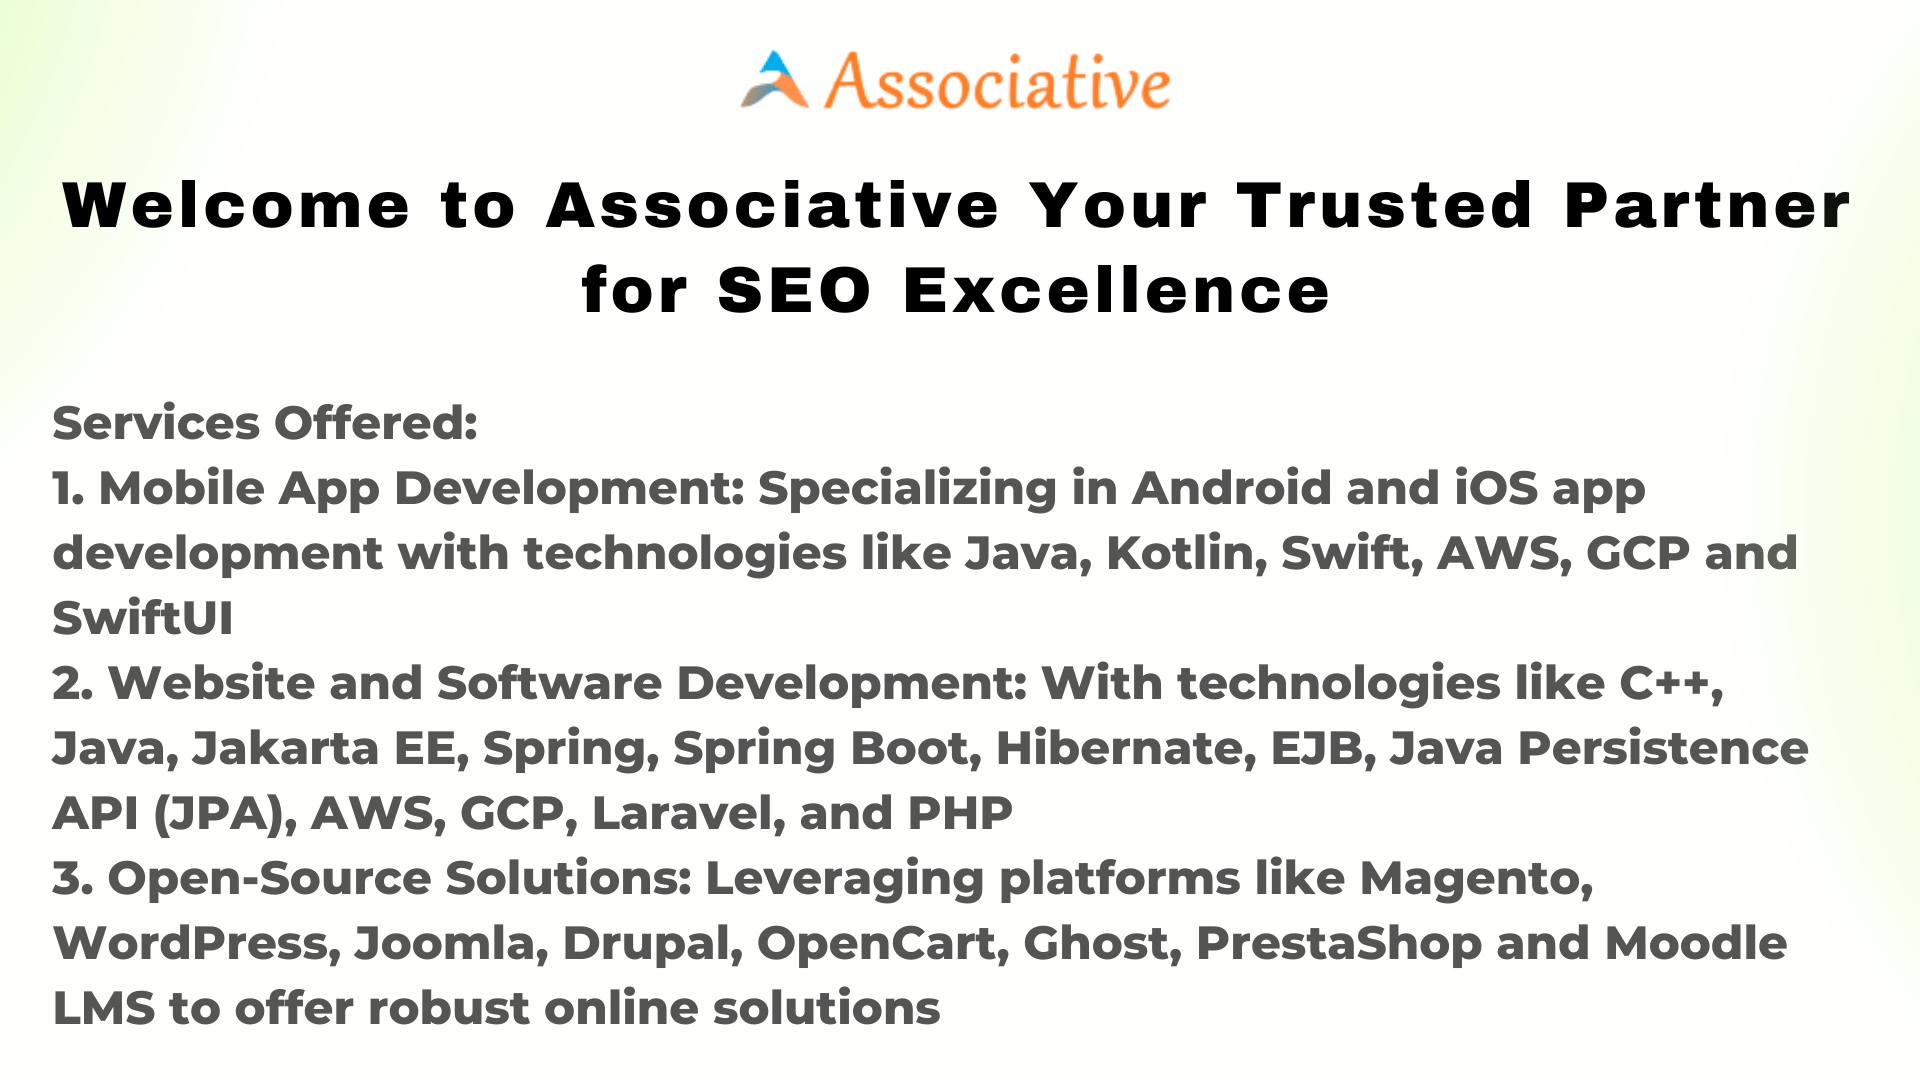 Welcome to Associative Your Trusted Partner for SEO Excellence